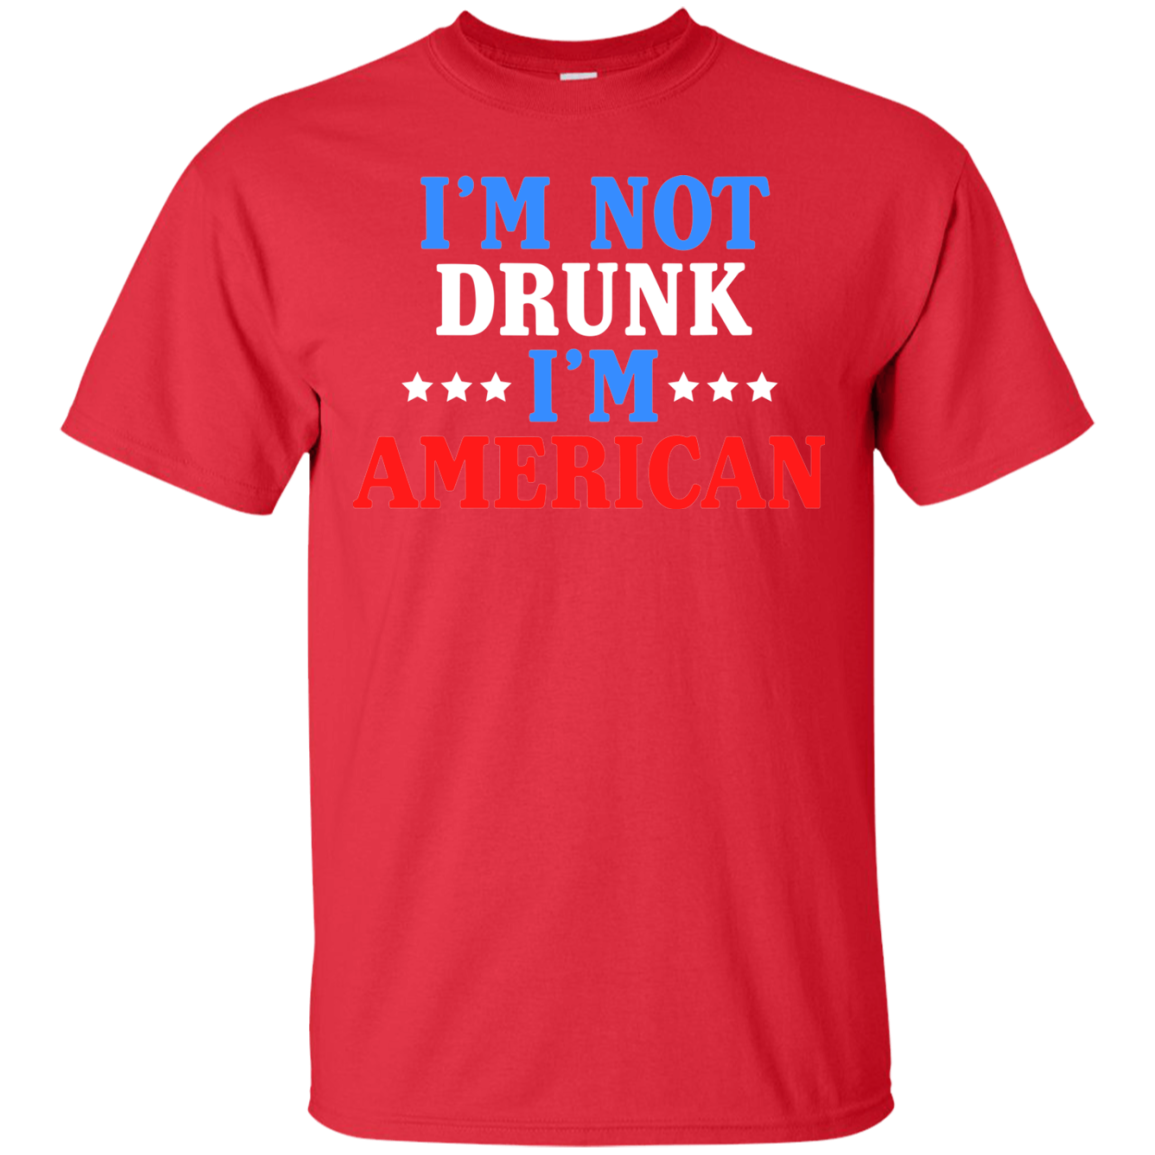 I'm Not Drunk, I'm American T-Shirt Apparel - The Beer Lodge